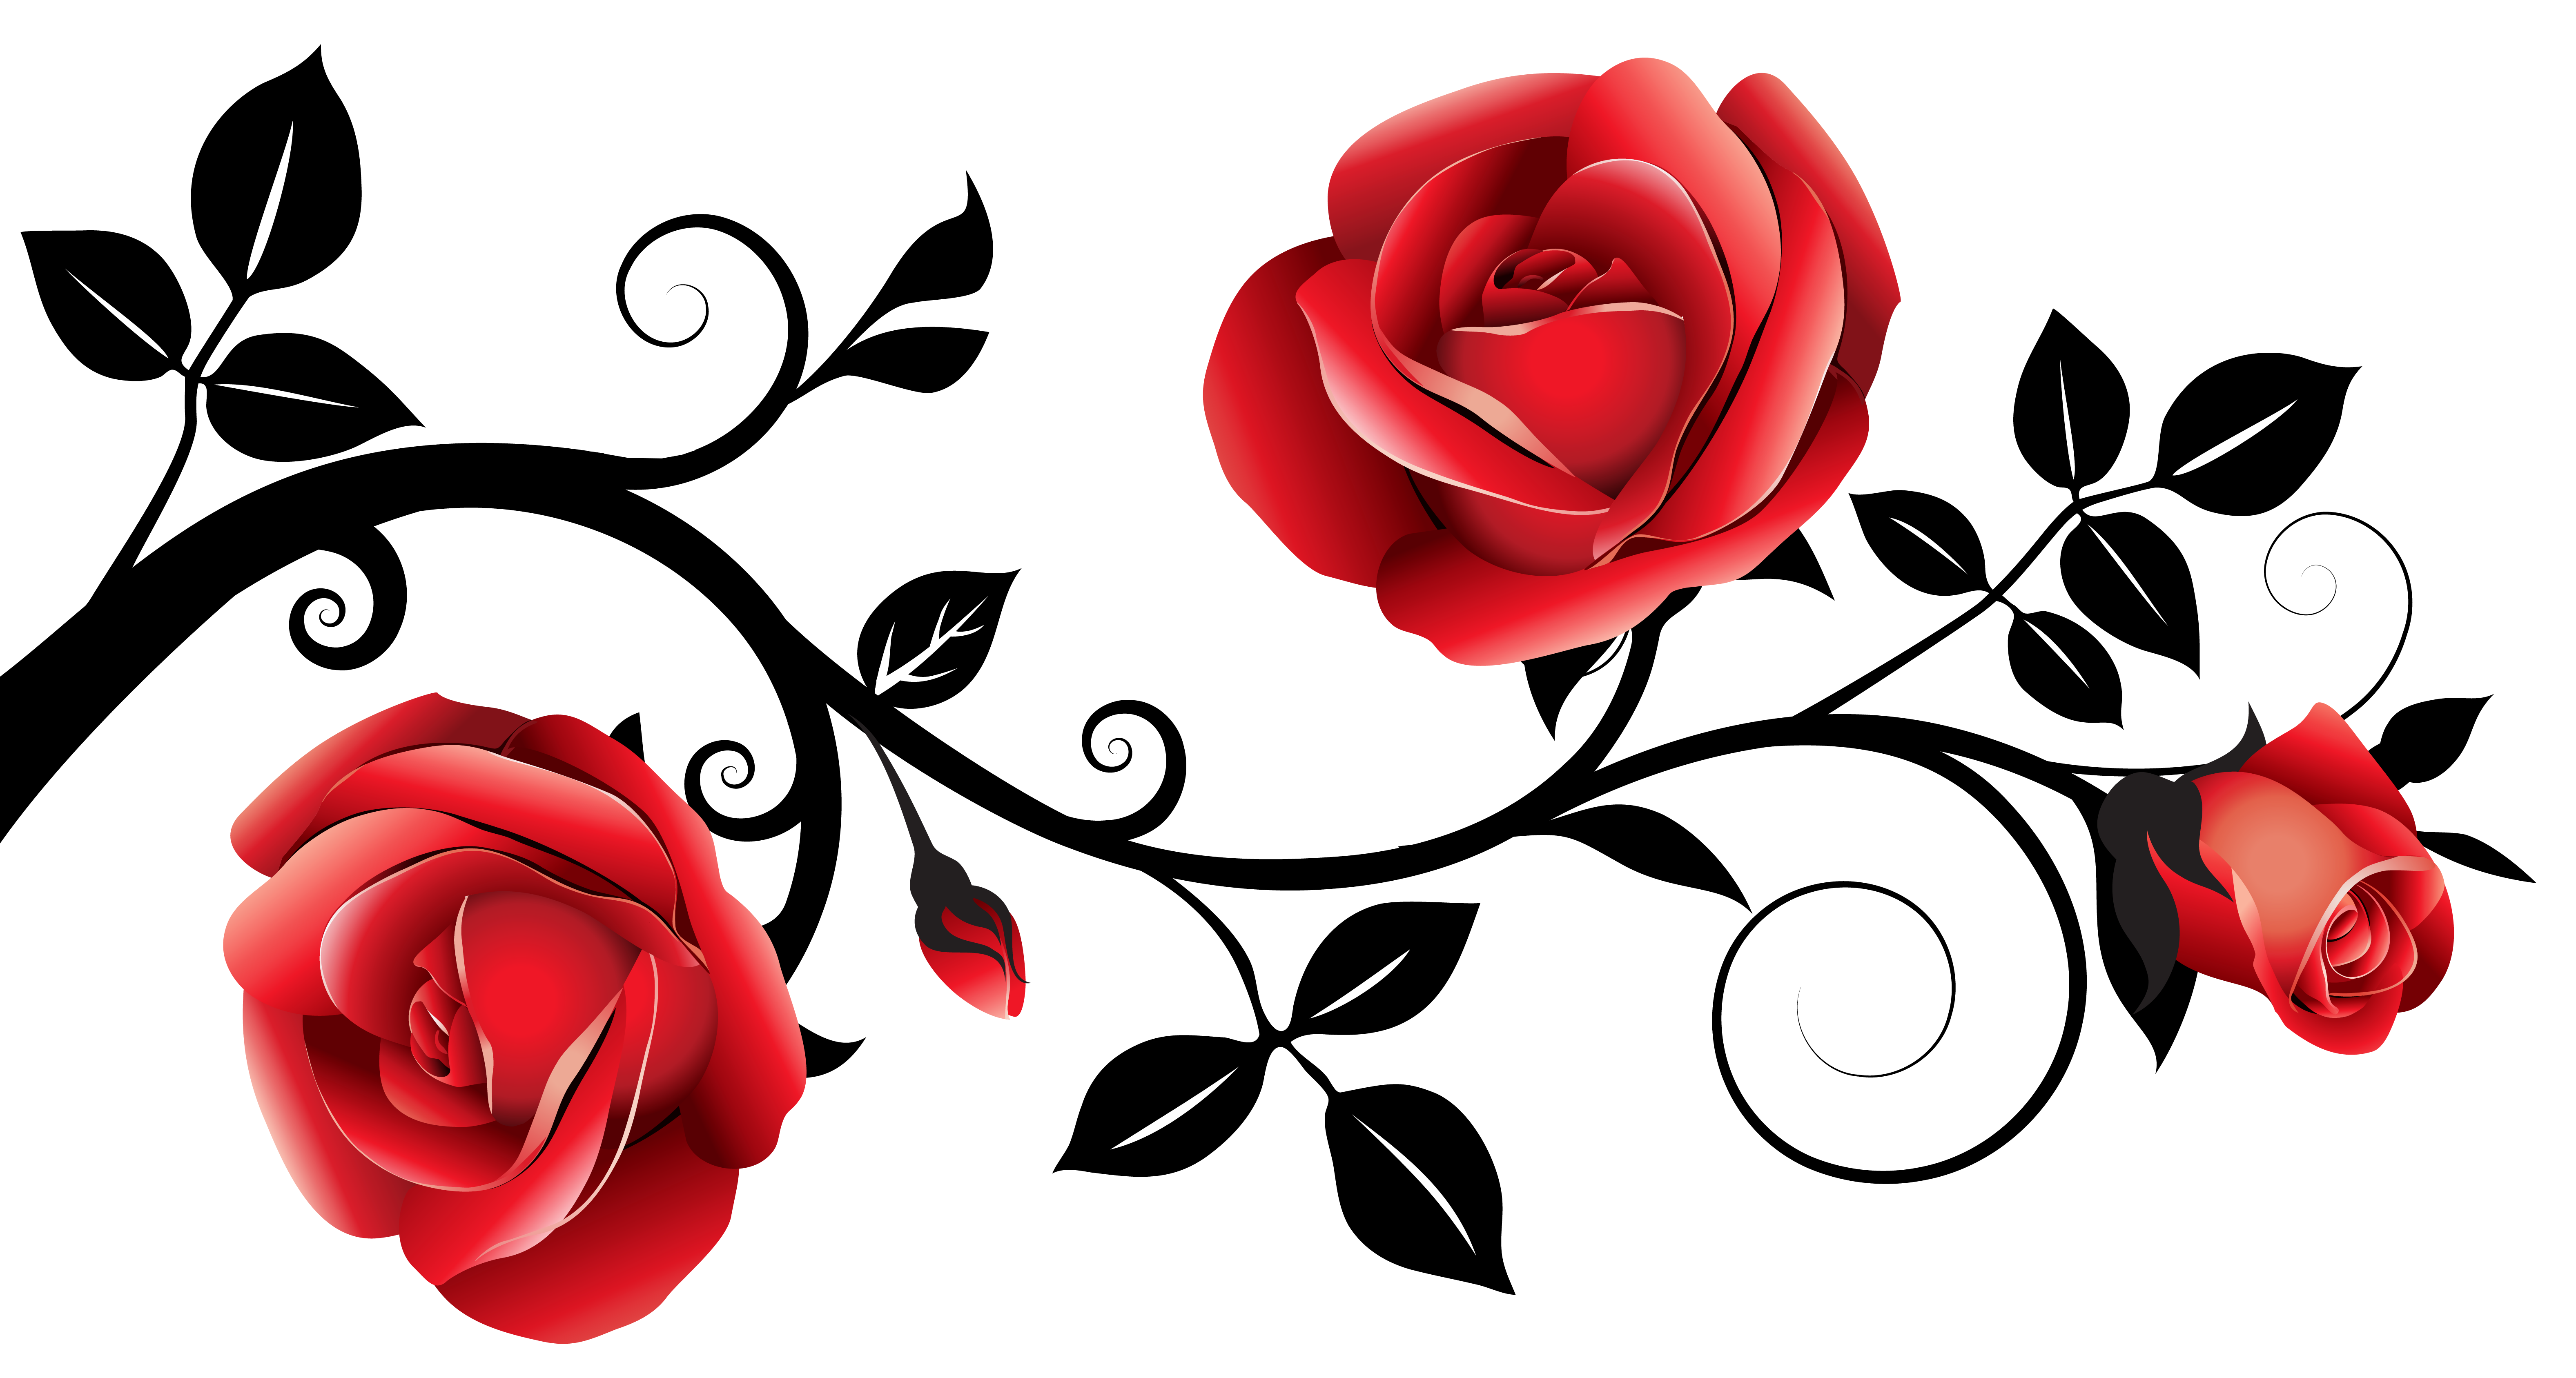 Roses cilpart cozy red. Clipart design rose